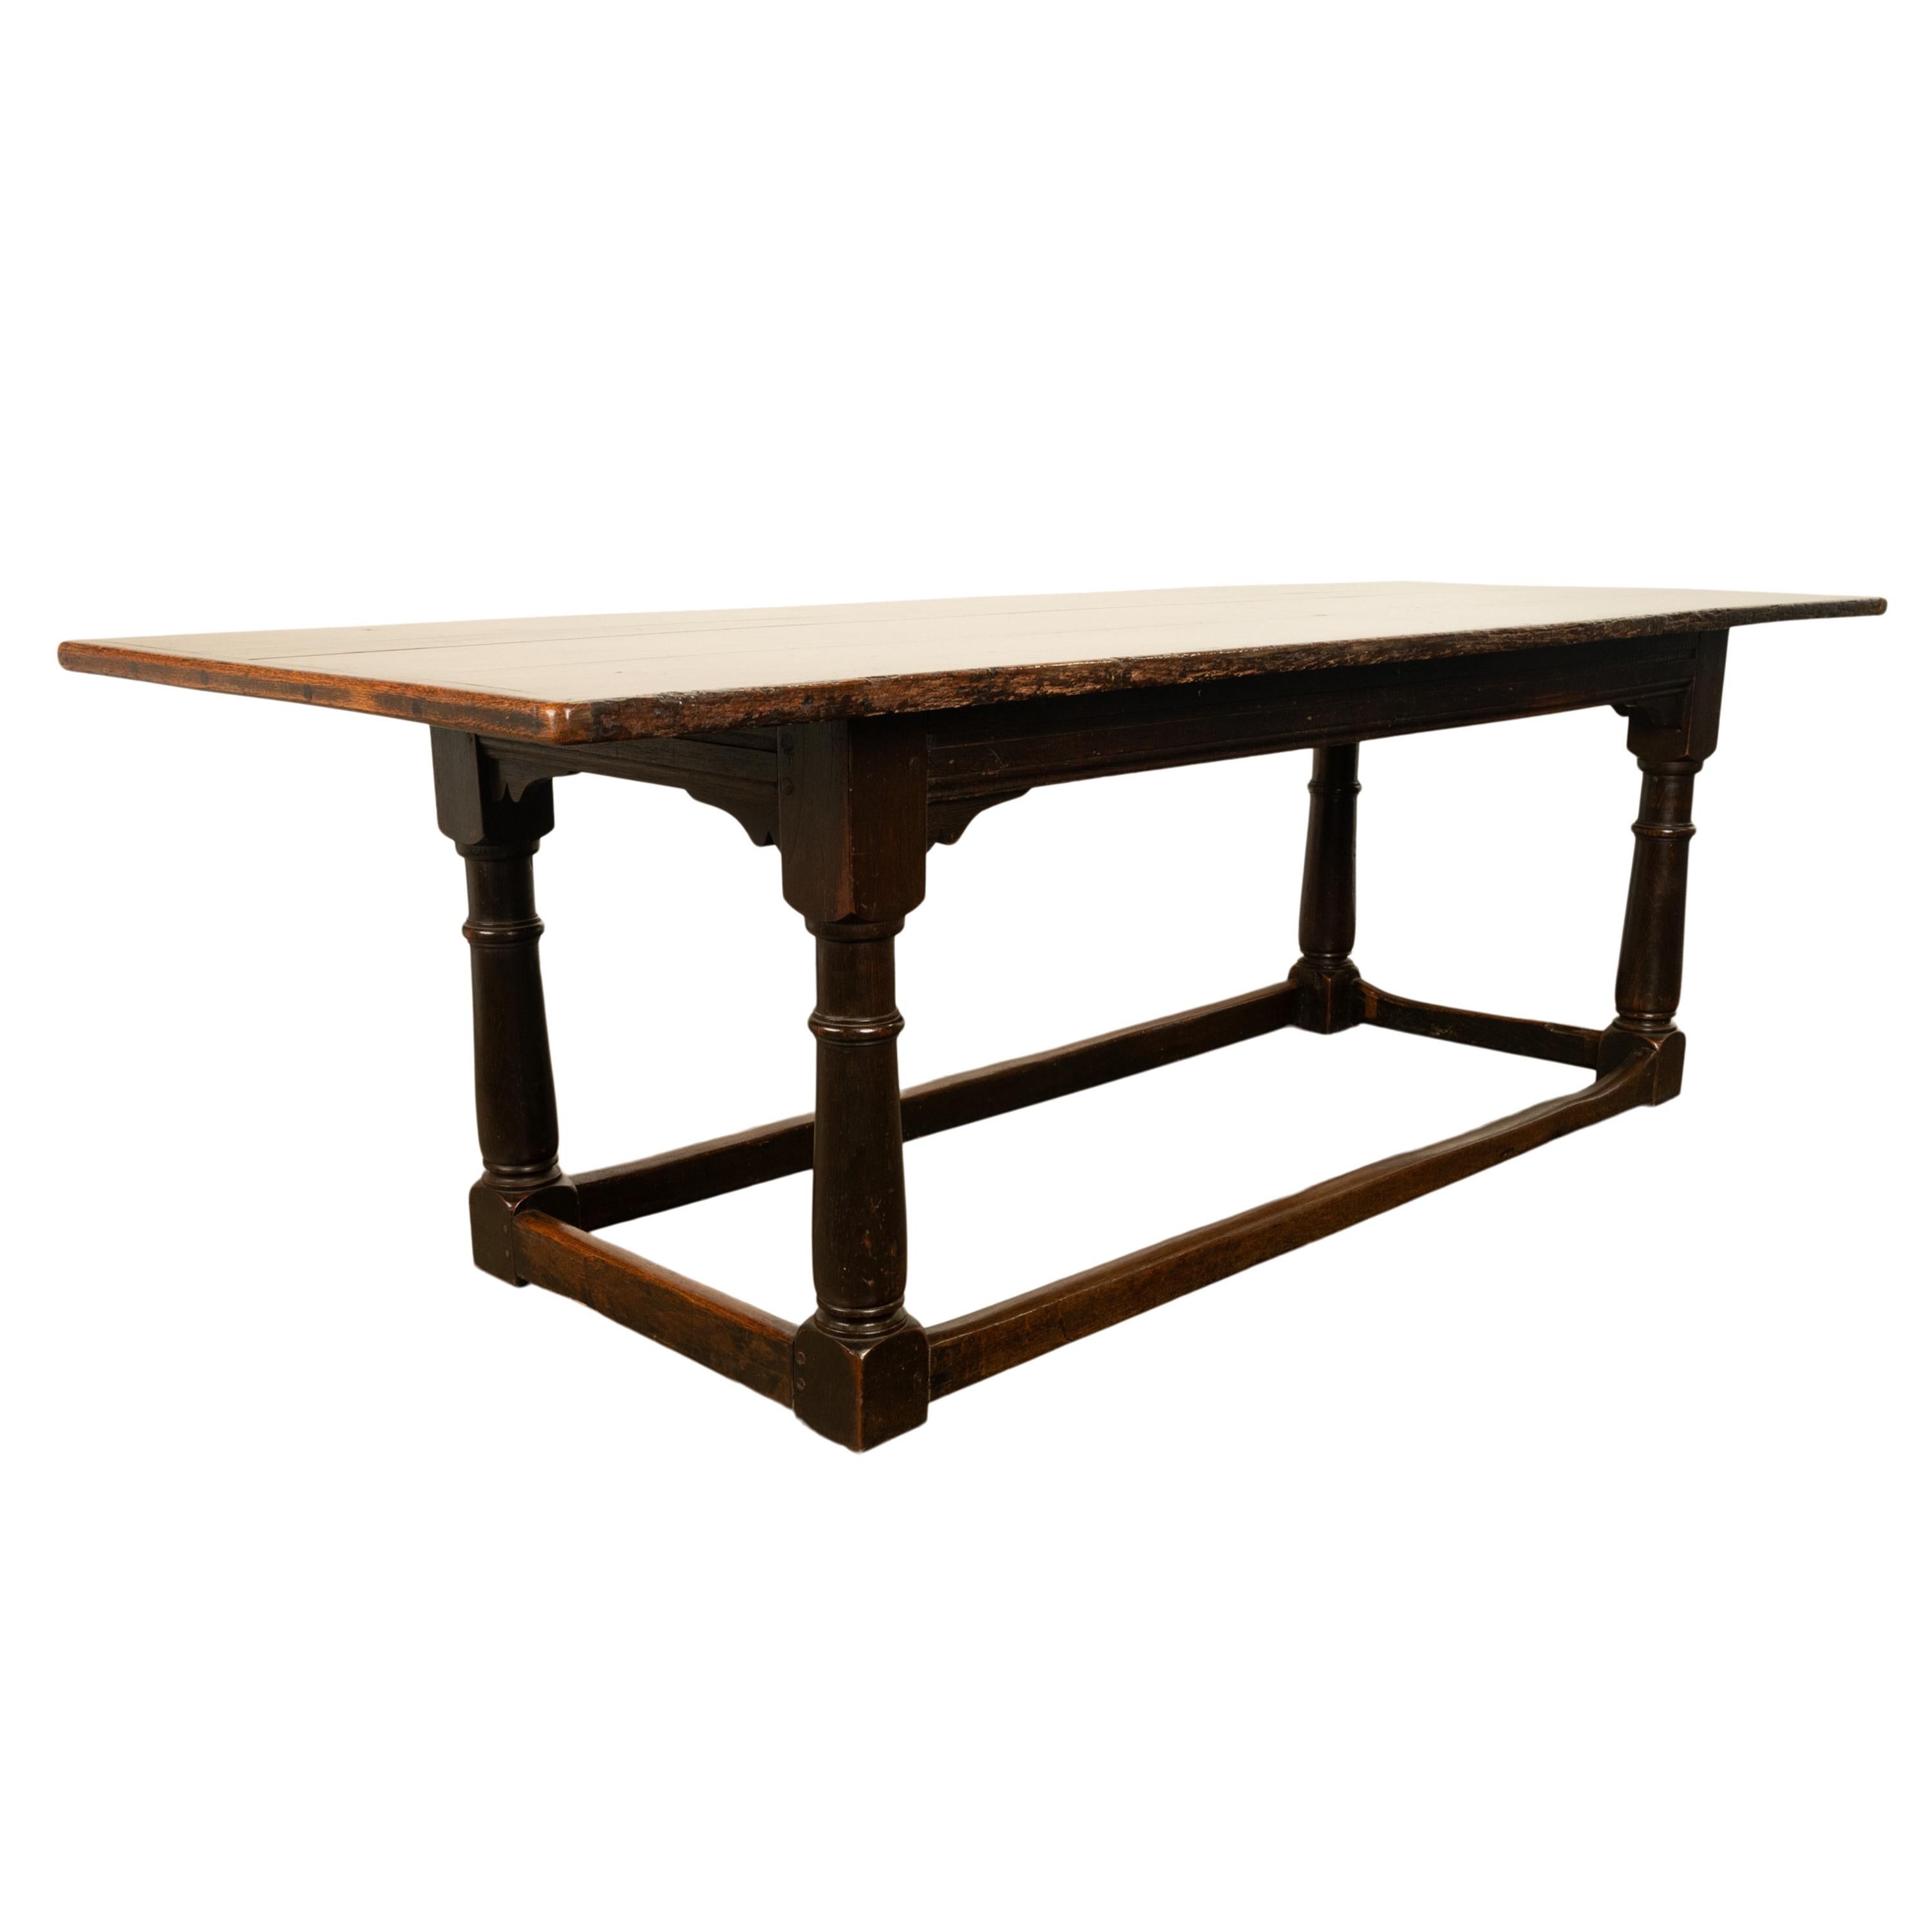 English Antique Charles II 17th Century Carved 8ft Oak Refectory Dining table 1680 For Sale